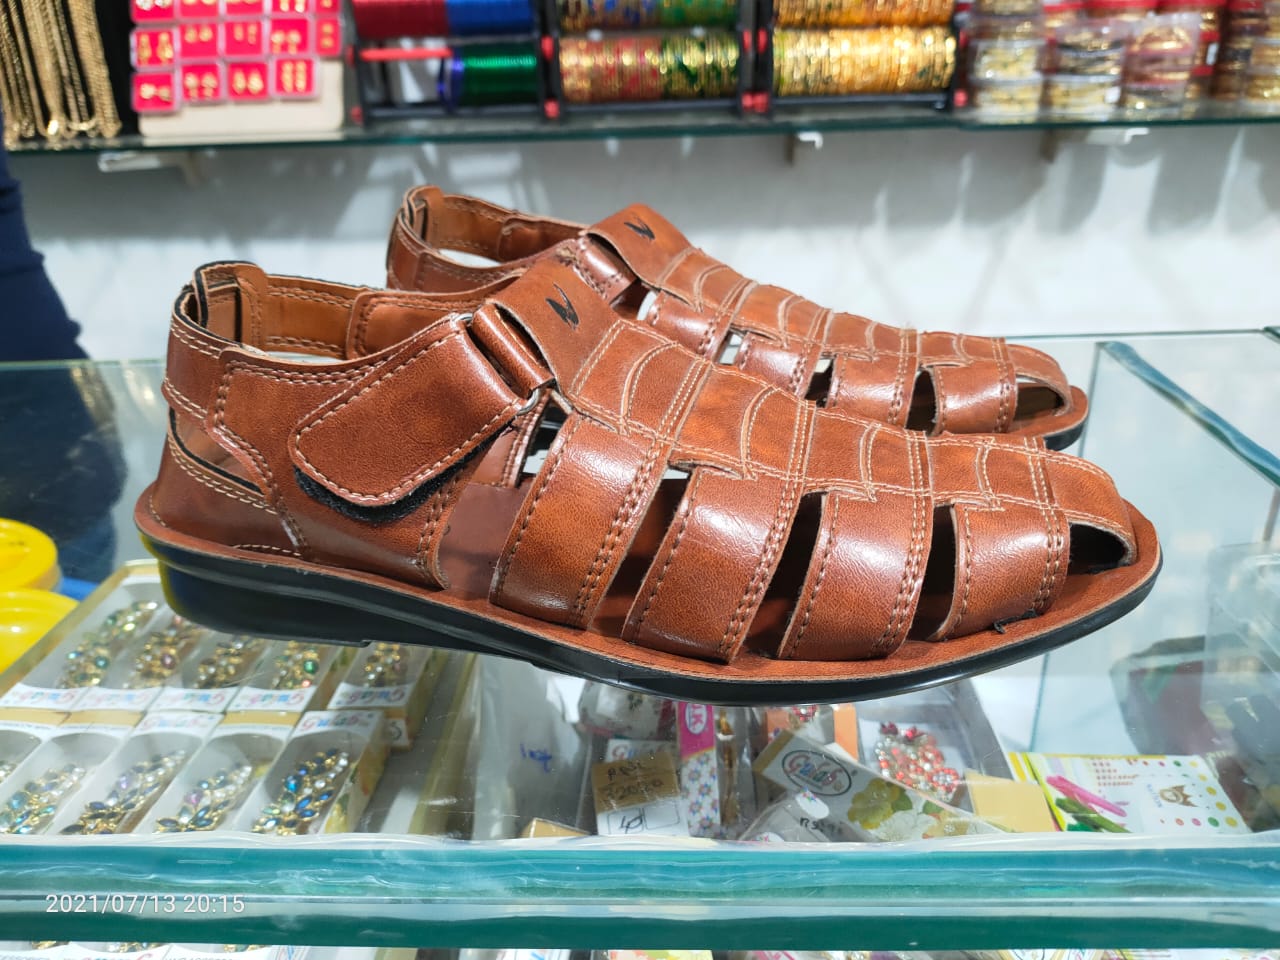 Mens leather slippers sales.